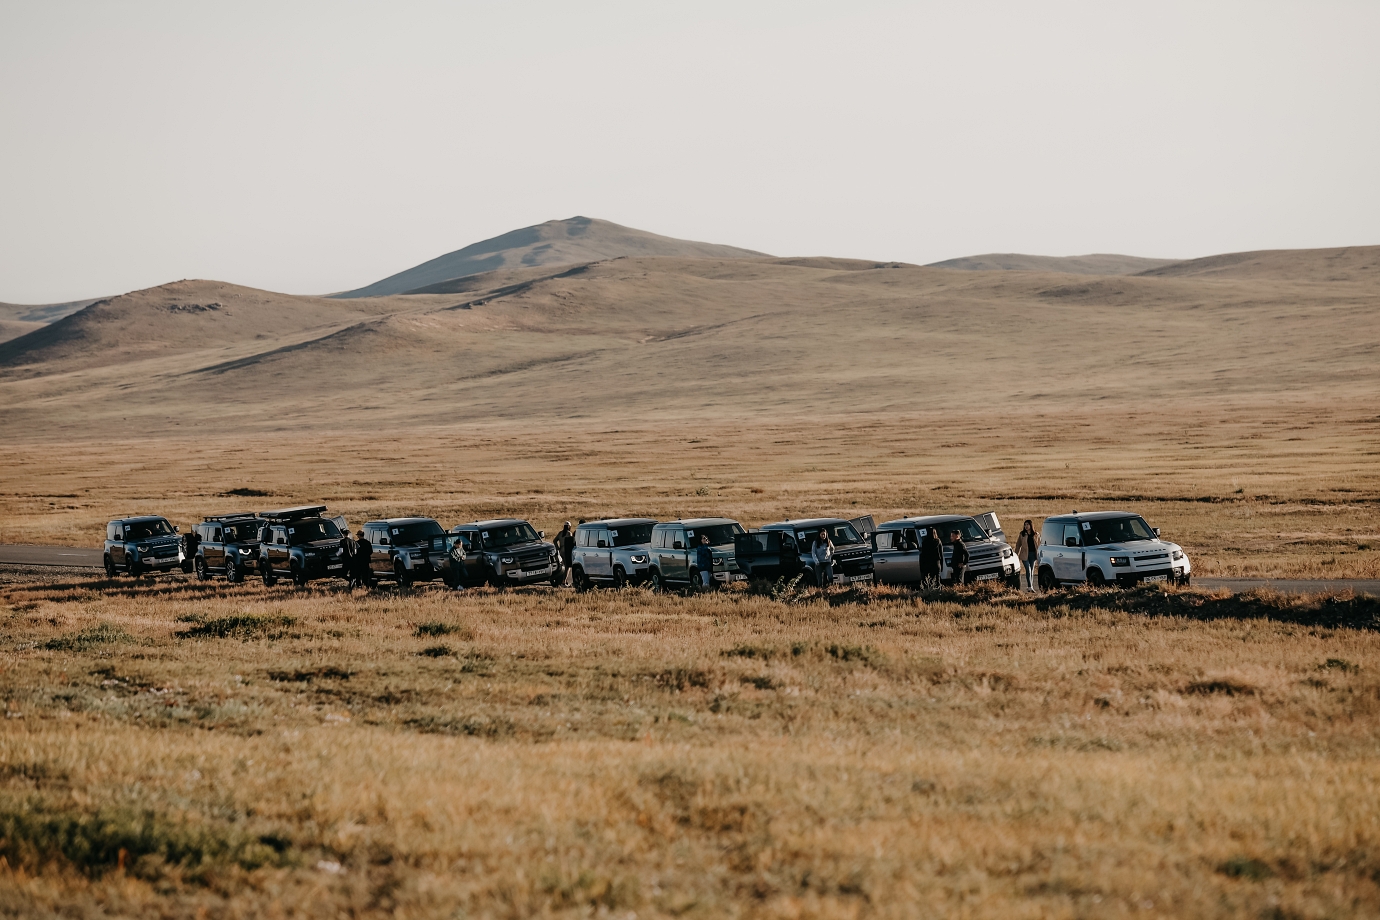 wearnes starchase, jlr, new defender, land rover, landrover, range rover, land rover, landrover, range rover, defender, land rover defender, wearnes automotive, jlr, landrover defender, jaguar land rover, wearnes starchase mongolia land rover defender experience : all roads lead to roam